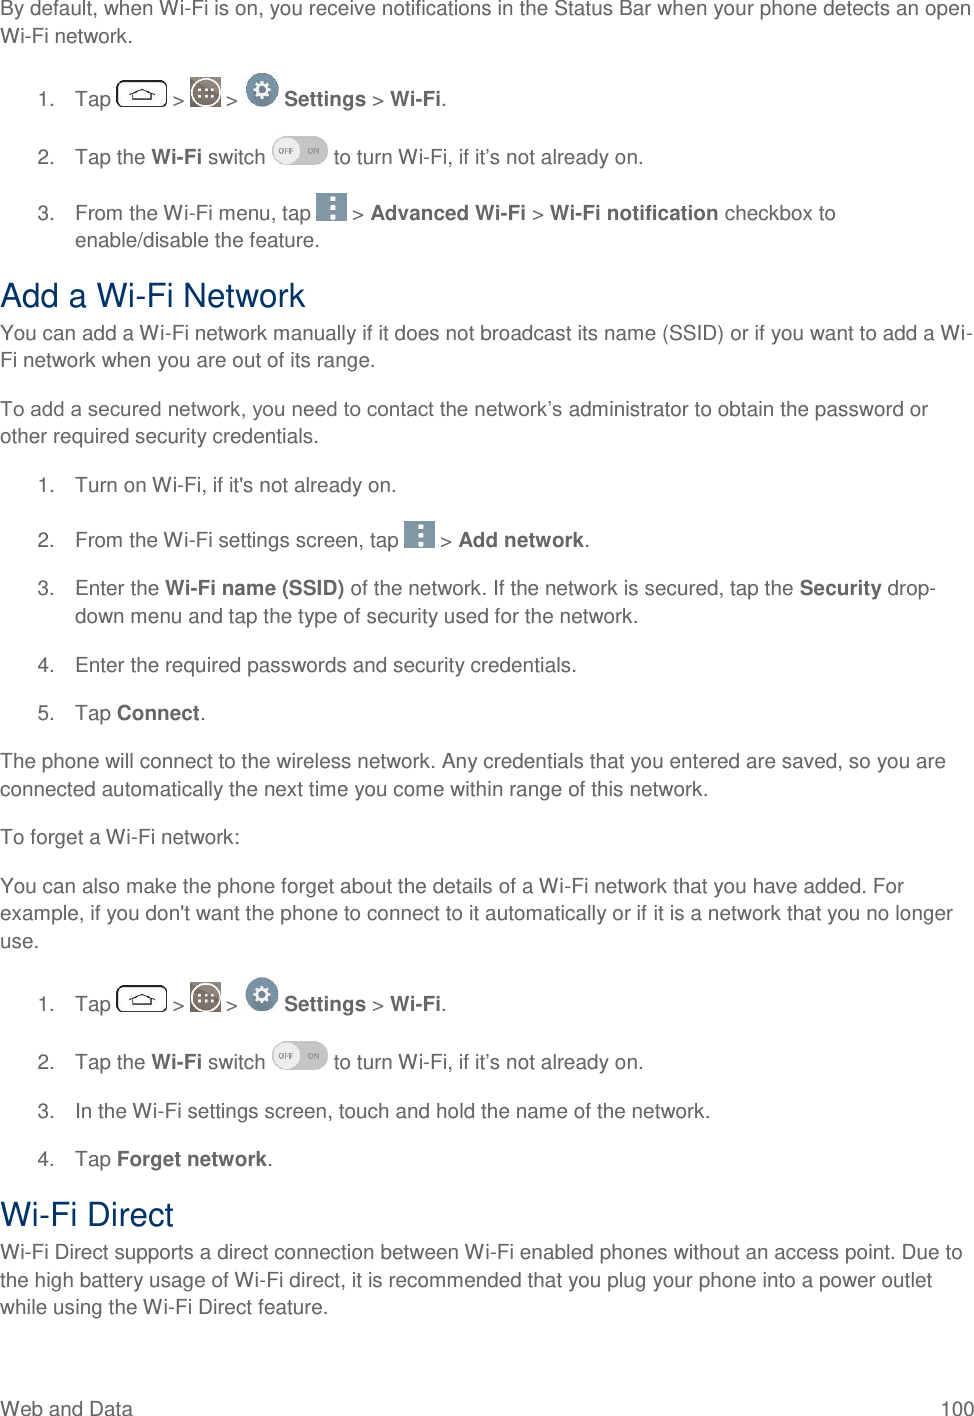 Web and Data  100 By default, when Wi-Fi is on, you receive notifications in the Status Bar when your phone detects an open Wi-Fi network. 1.  Tap   &gt;   &gt;   Settings &gt; Wi-Fi. 2.  Tap the Wi-Fi switch   to turn Wi-Fi, if it‘s not already on.  3.  From the Wi-Fi menu, tap   &gt; Advanced Wi-Fi &gt; Wi-Fi notification checkbox to enable/disable the feature.  Add a Wi-Fi Network You can add a Wi-Fi network manually if it does not broadcast its name (SSID) or if you want to add a Wi-Fi network when you are out of its range. To add a secured network, you need to contact the network‘s administrator to obtain the password or other required security credentials. 1.  Turn on Wi-Fi, if it&apos;s not already on. 2.  From the Wi-Fi settings screen, tap   &gt; Add network. 3.  Enter the Wi-Fi name (SSID) of the network. If the network is secured, tap the Security drop-down menu and tap the type of security used for the network. 4.  Enter the required passwords and security credentials. 5.  Tap Connect. The phone will connect to the wireless network. Any credentials that you entered are saved, so you are connected automatically the next time you come within range of this network. To forget a Wi-Fi network: You can also make the phone forget about the details of a Wi-Fi network that you have added. For example, if you don&apos;t want the phone to connect to it automatically or if it is a network that you no longer use. 1.  Tap   &gt;   &gt;   Settings &gt; Wi-Fi. 2.  Tap the Wi-Fi switch   to turn Wi-Fi, if it‘s not already on.  3.  In the Wi-Fi settings screen, touch and hold the name of the network. 4.  Tap Forget network. Wi-Fi Direct Wi-Fi Direct supports a direct connection between Wi-Fi enabled phones without an access point. Due to the high battery usage of Wi-Fi direct, it is recommended that you plug your phone into a power outlet while using the Wi-Fi Direct feature. 